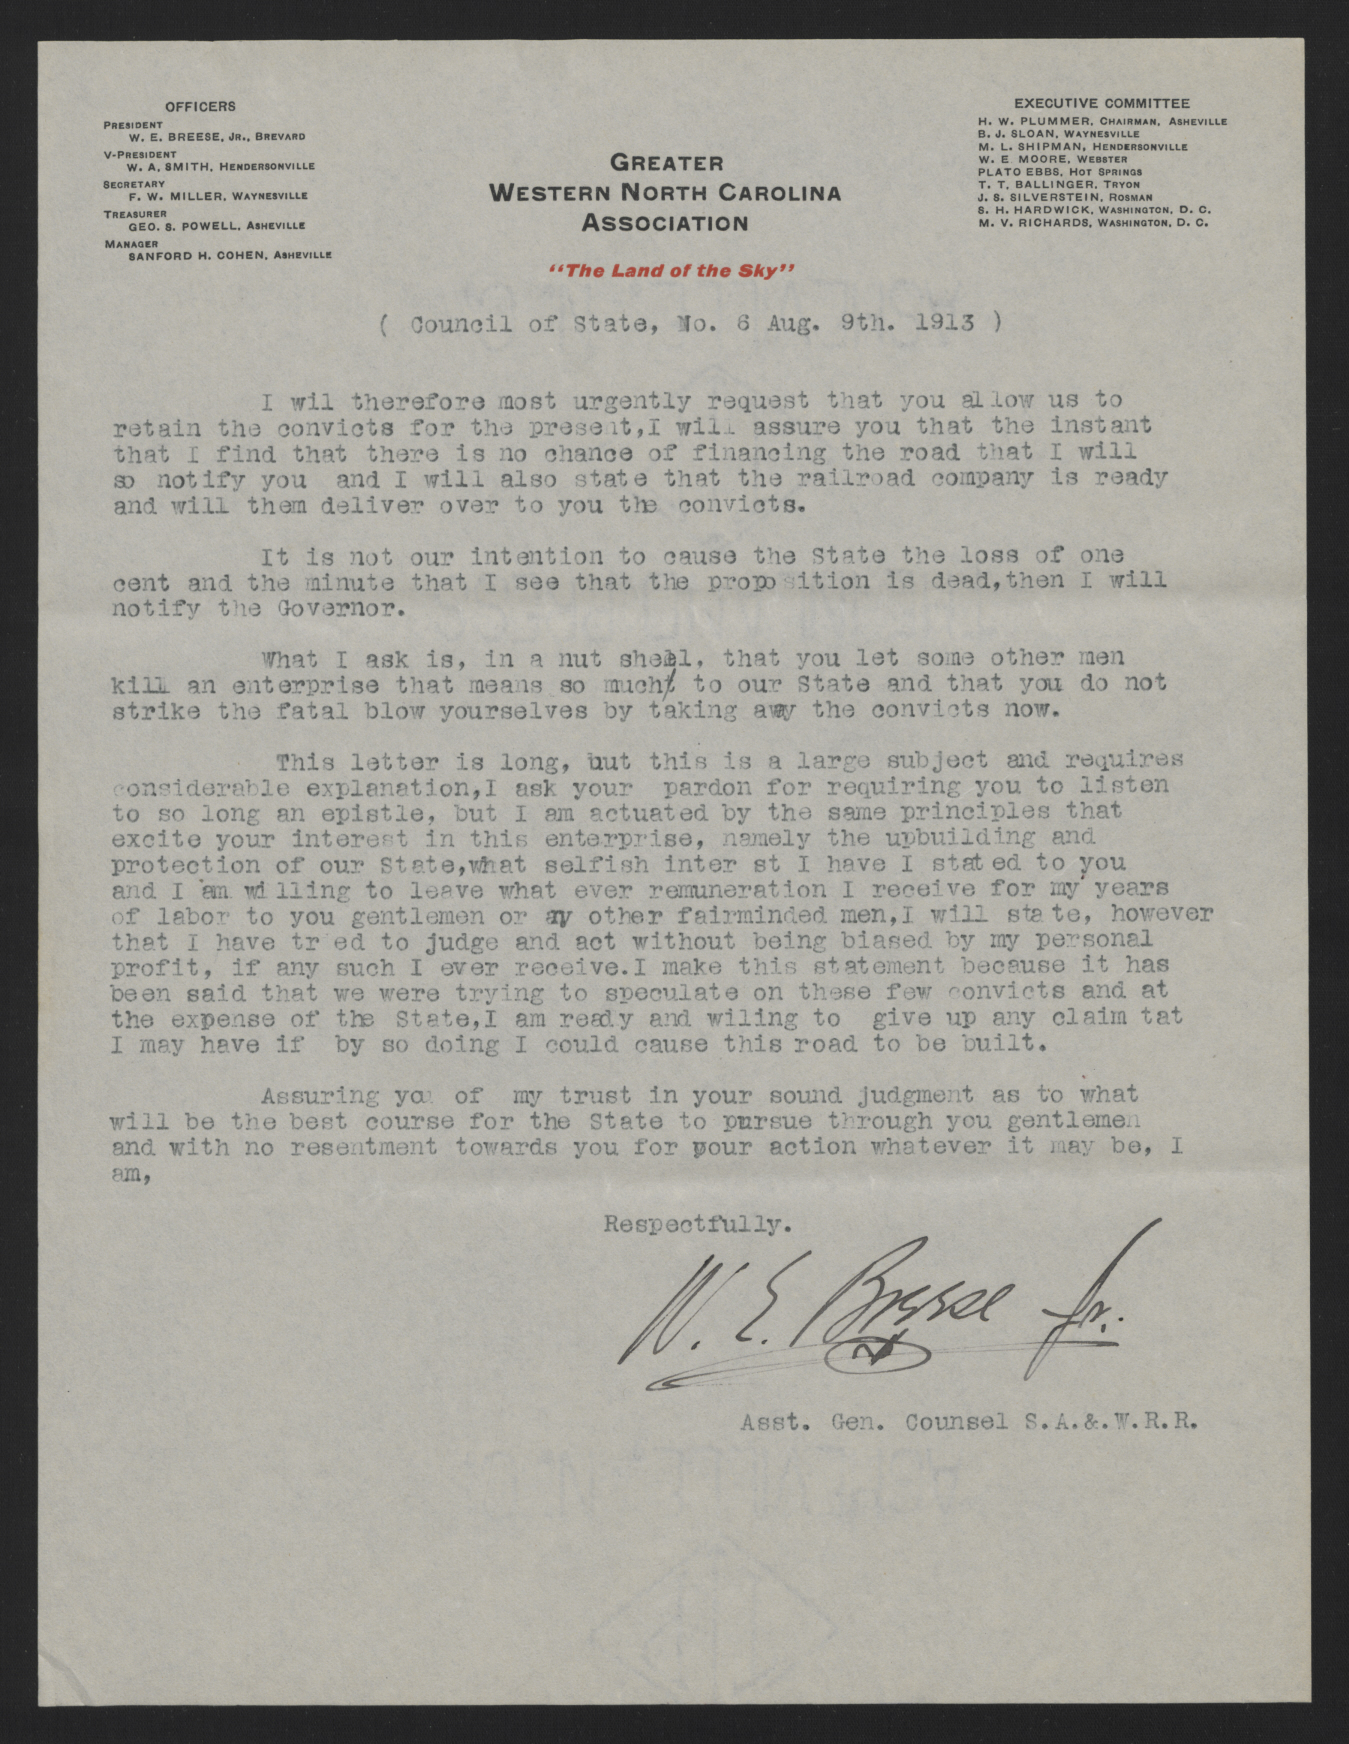 Letter from Breese to the Council of State, August 9, 1913, page 6